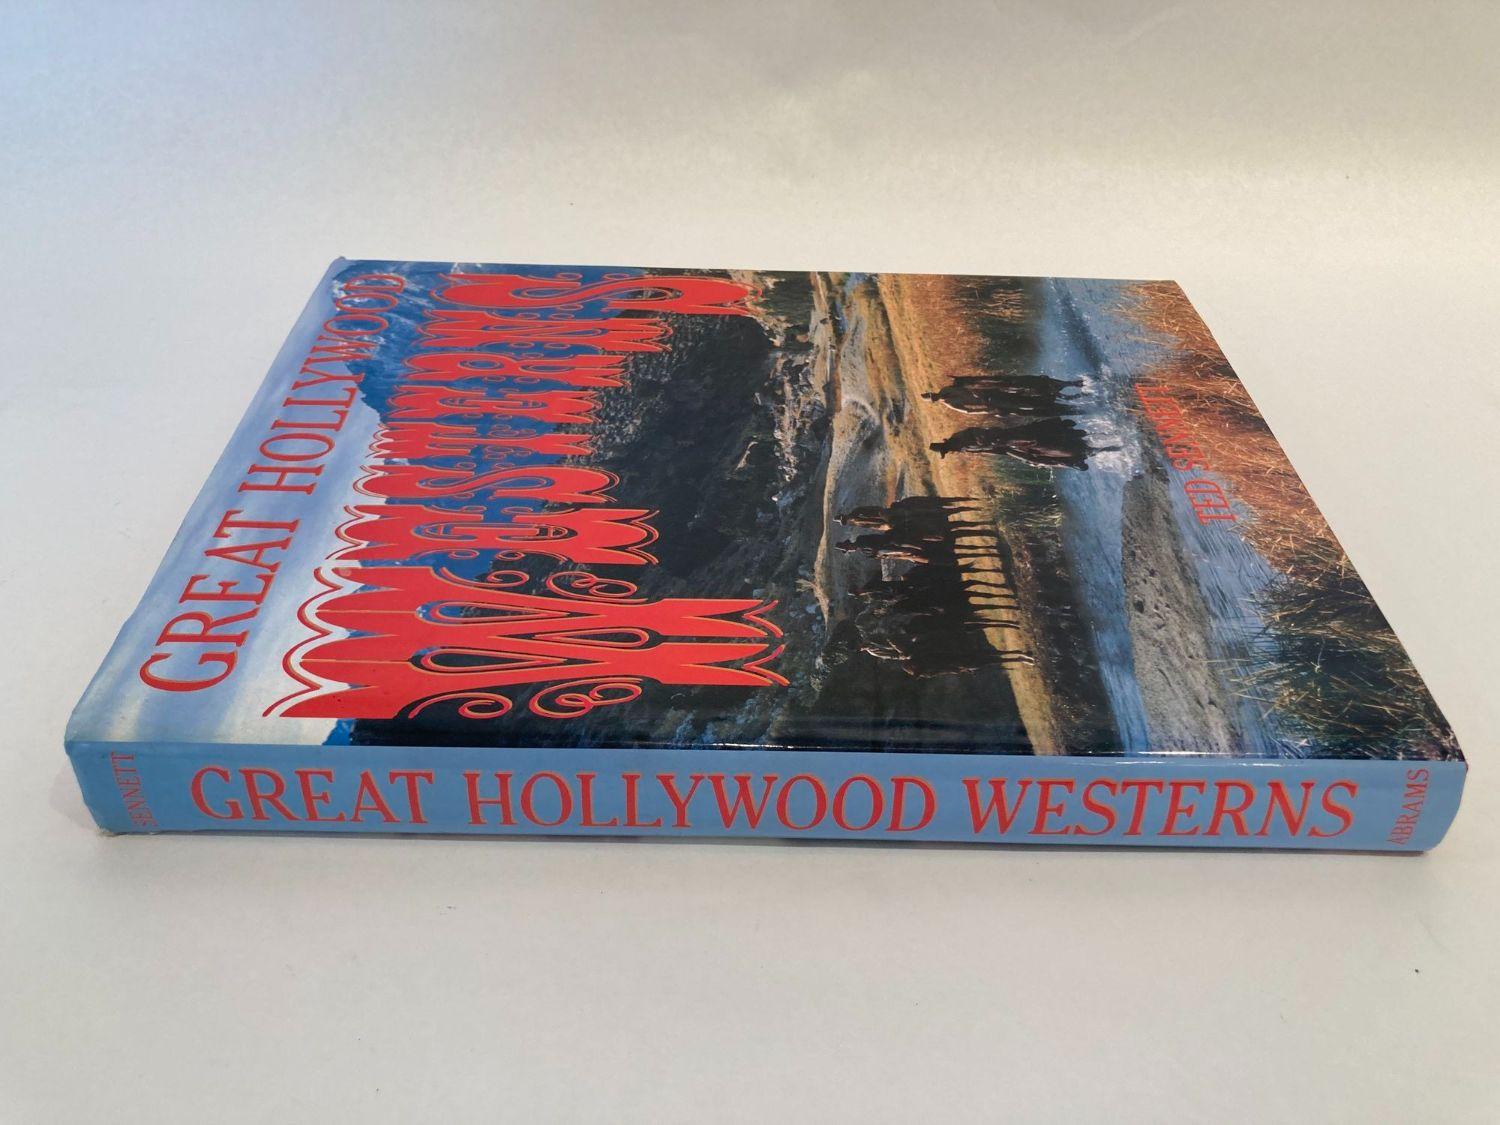 American Great Hollywood Westerns Hardcover Book by Ted Sennett